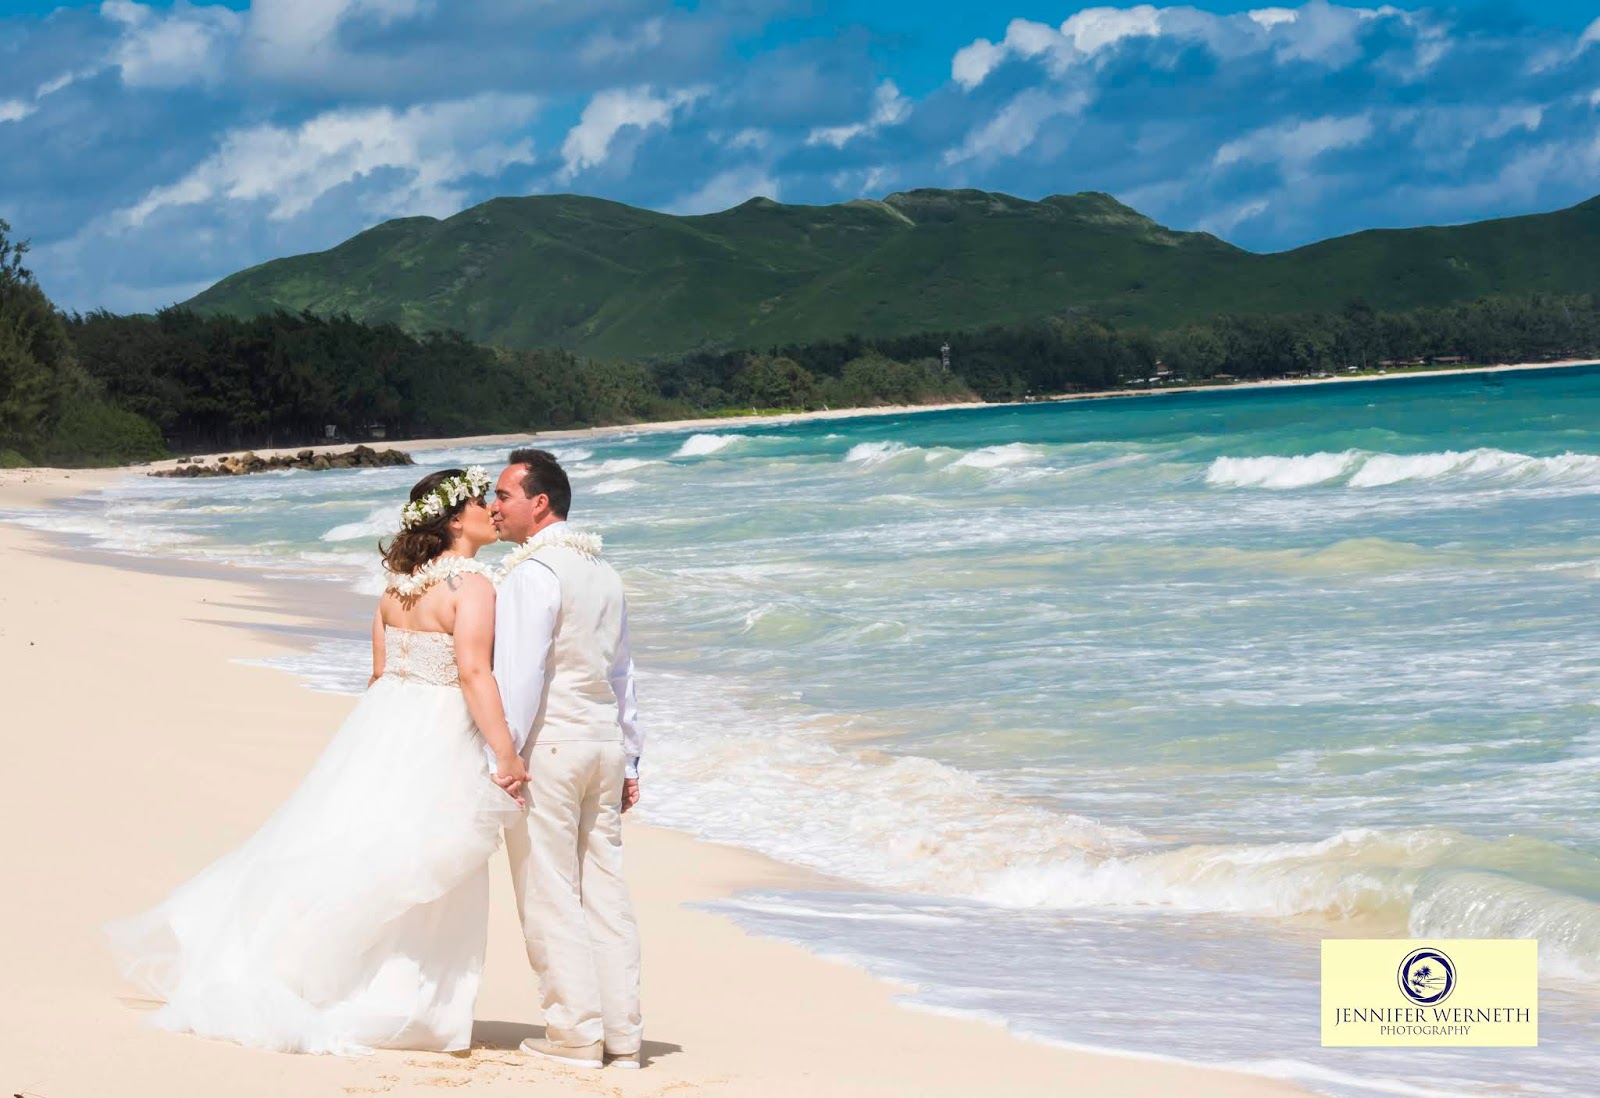 It was a blast shooting wedding photography at China Walls in Oahu, Hawaii. The waves ...1600 x 1098